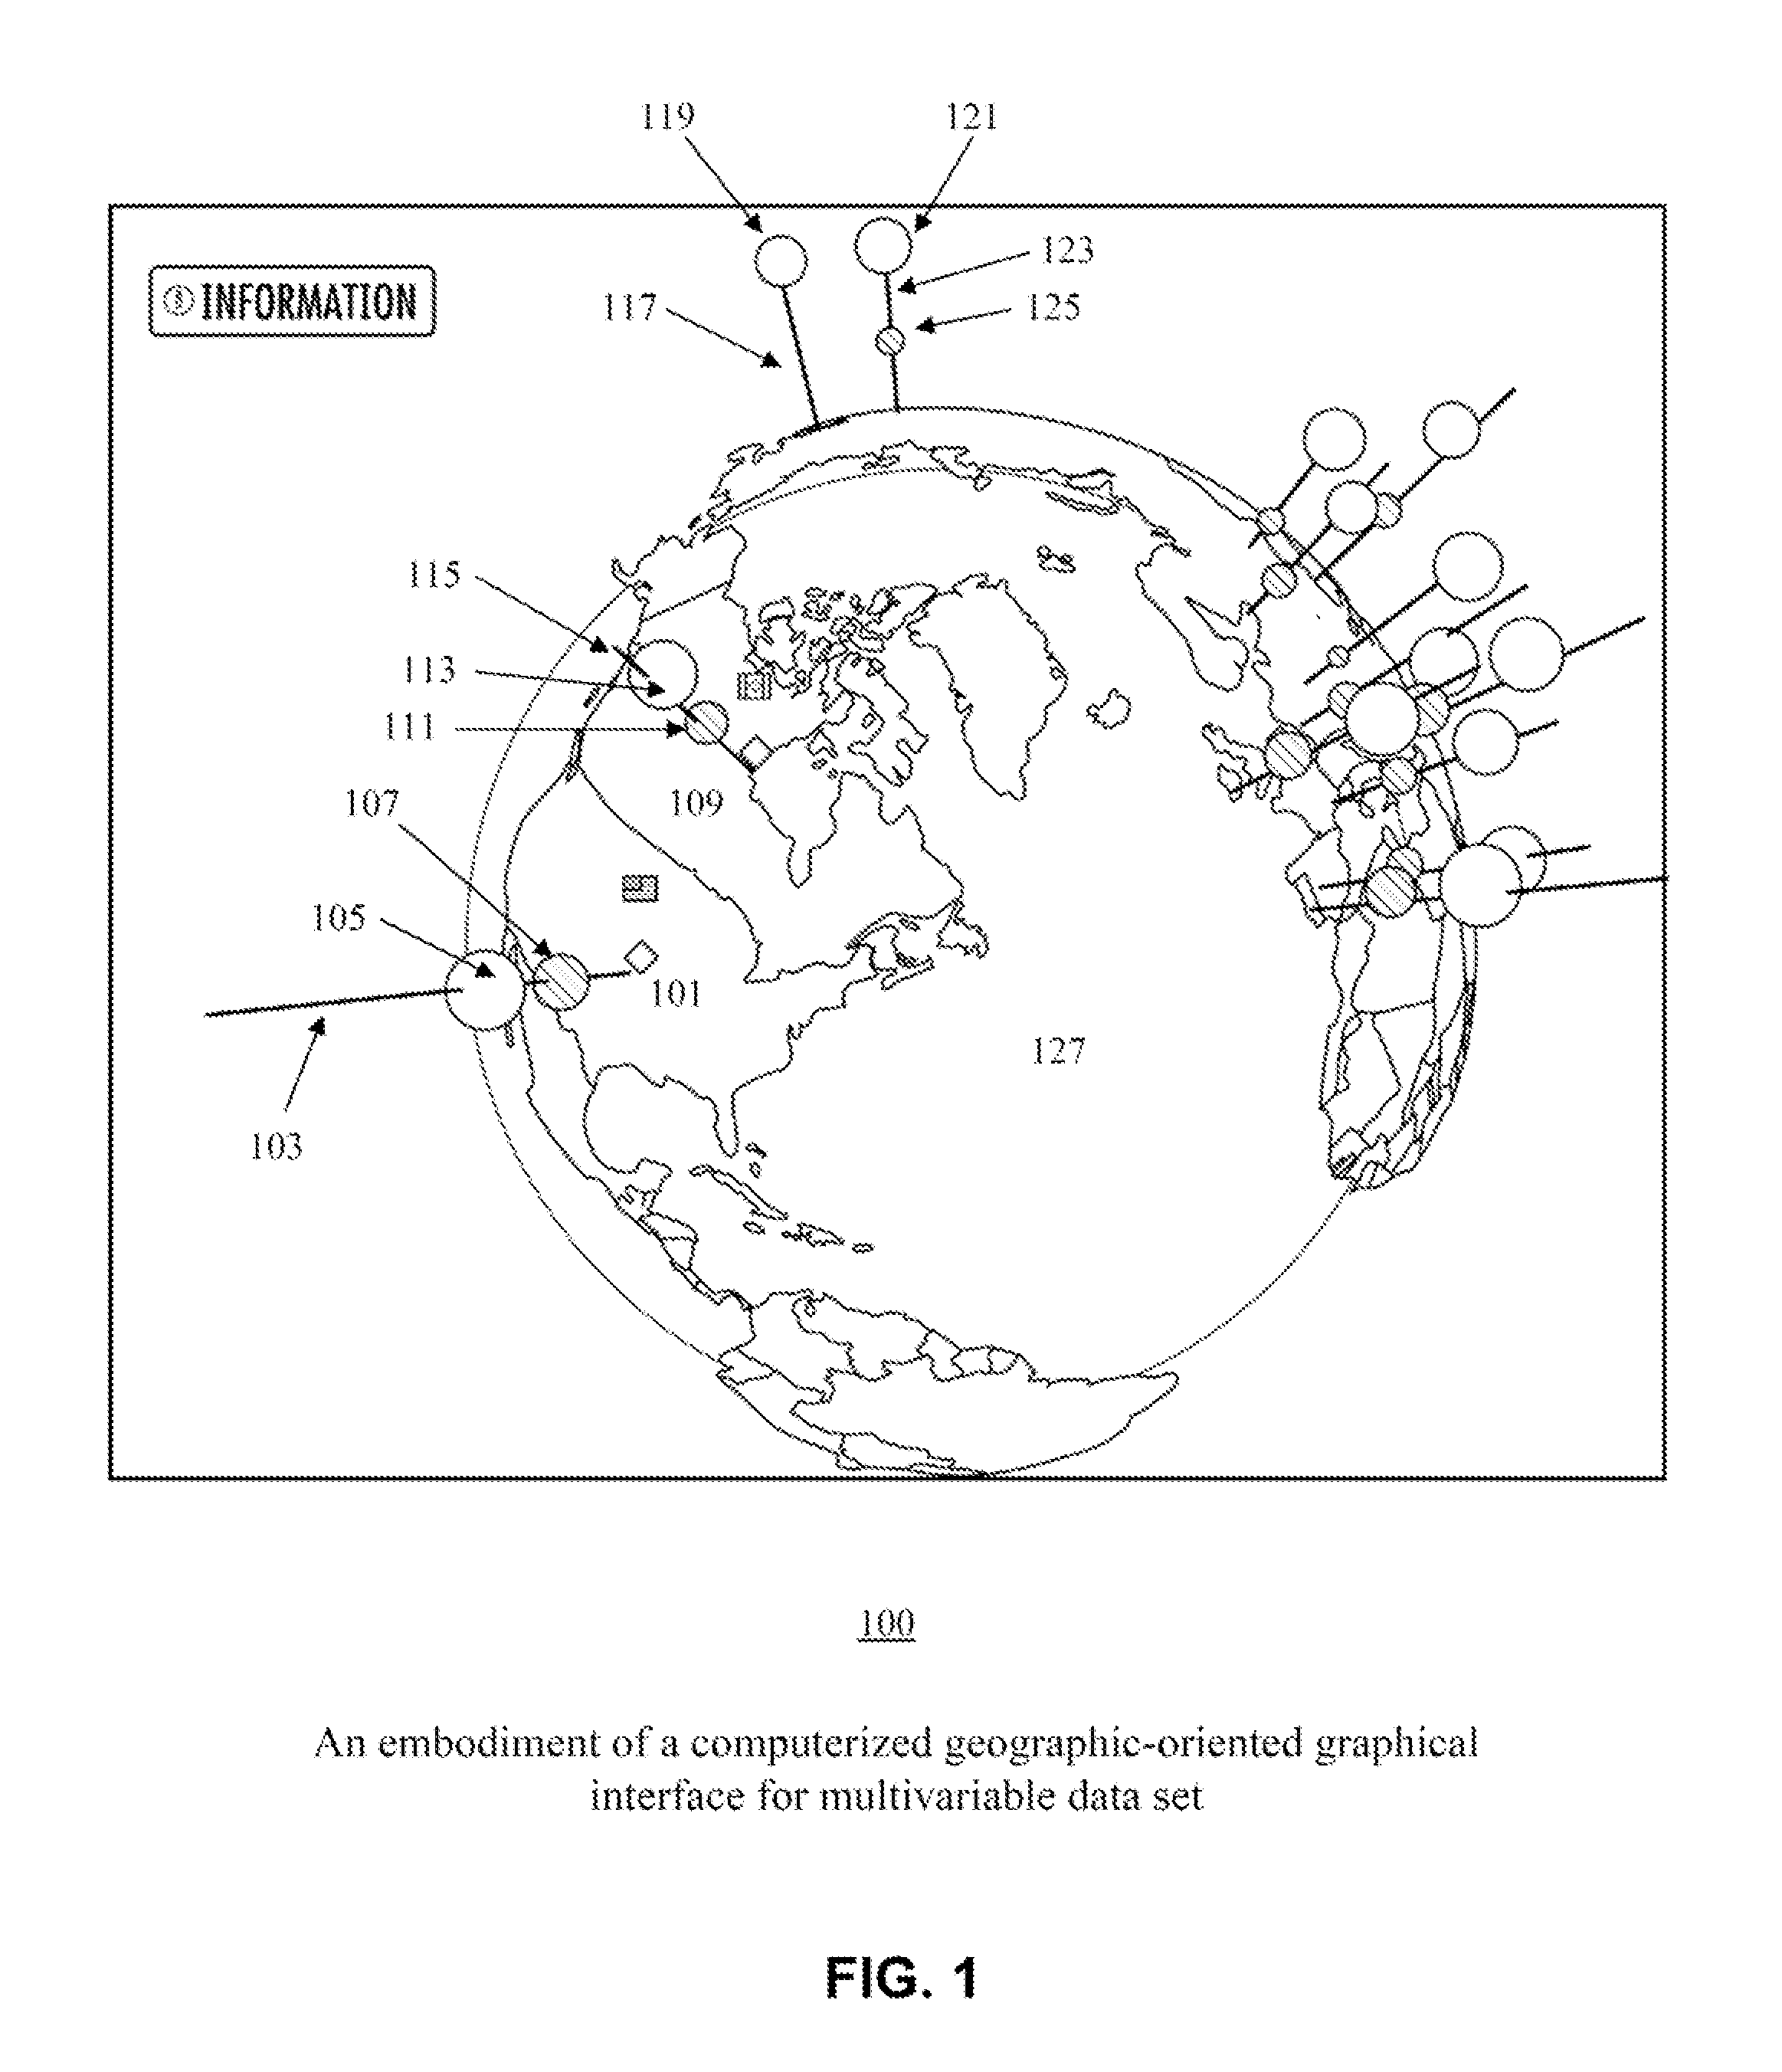 Method and System for Geographic-Oriented Graphical Representation of Multivariable Input Data Set